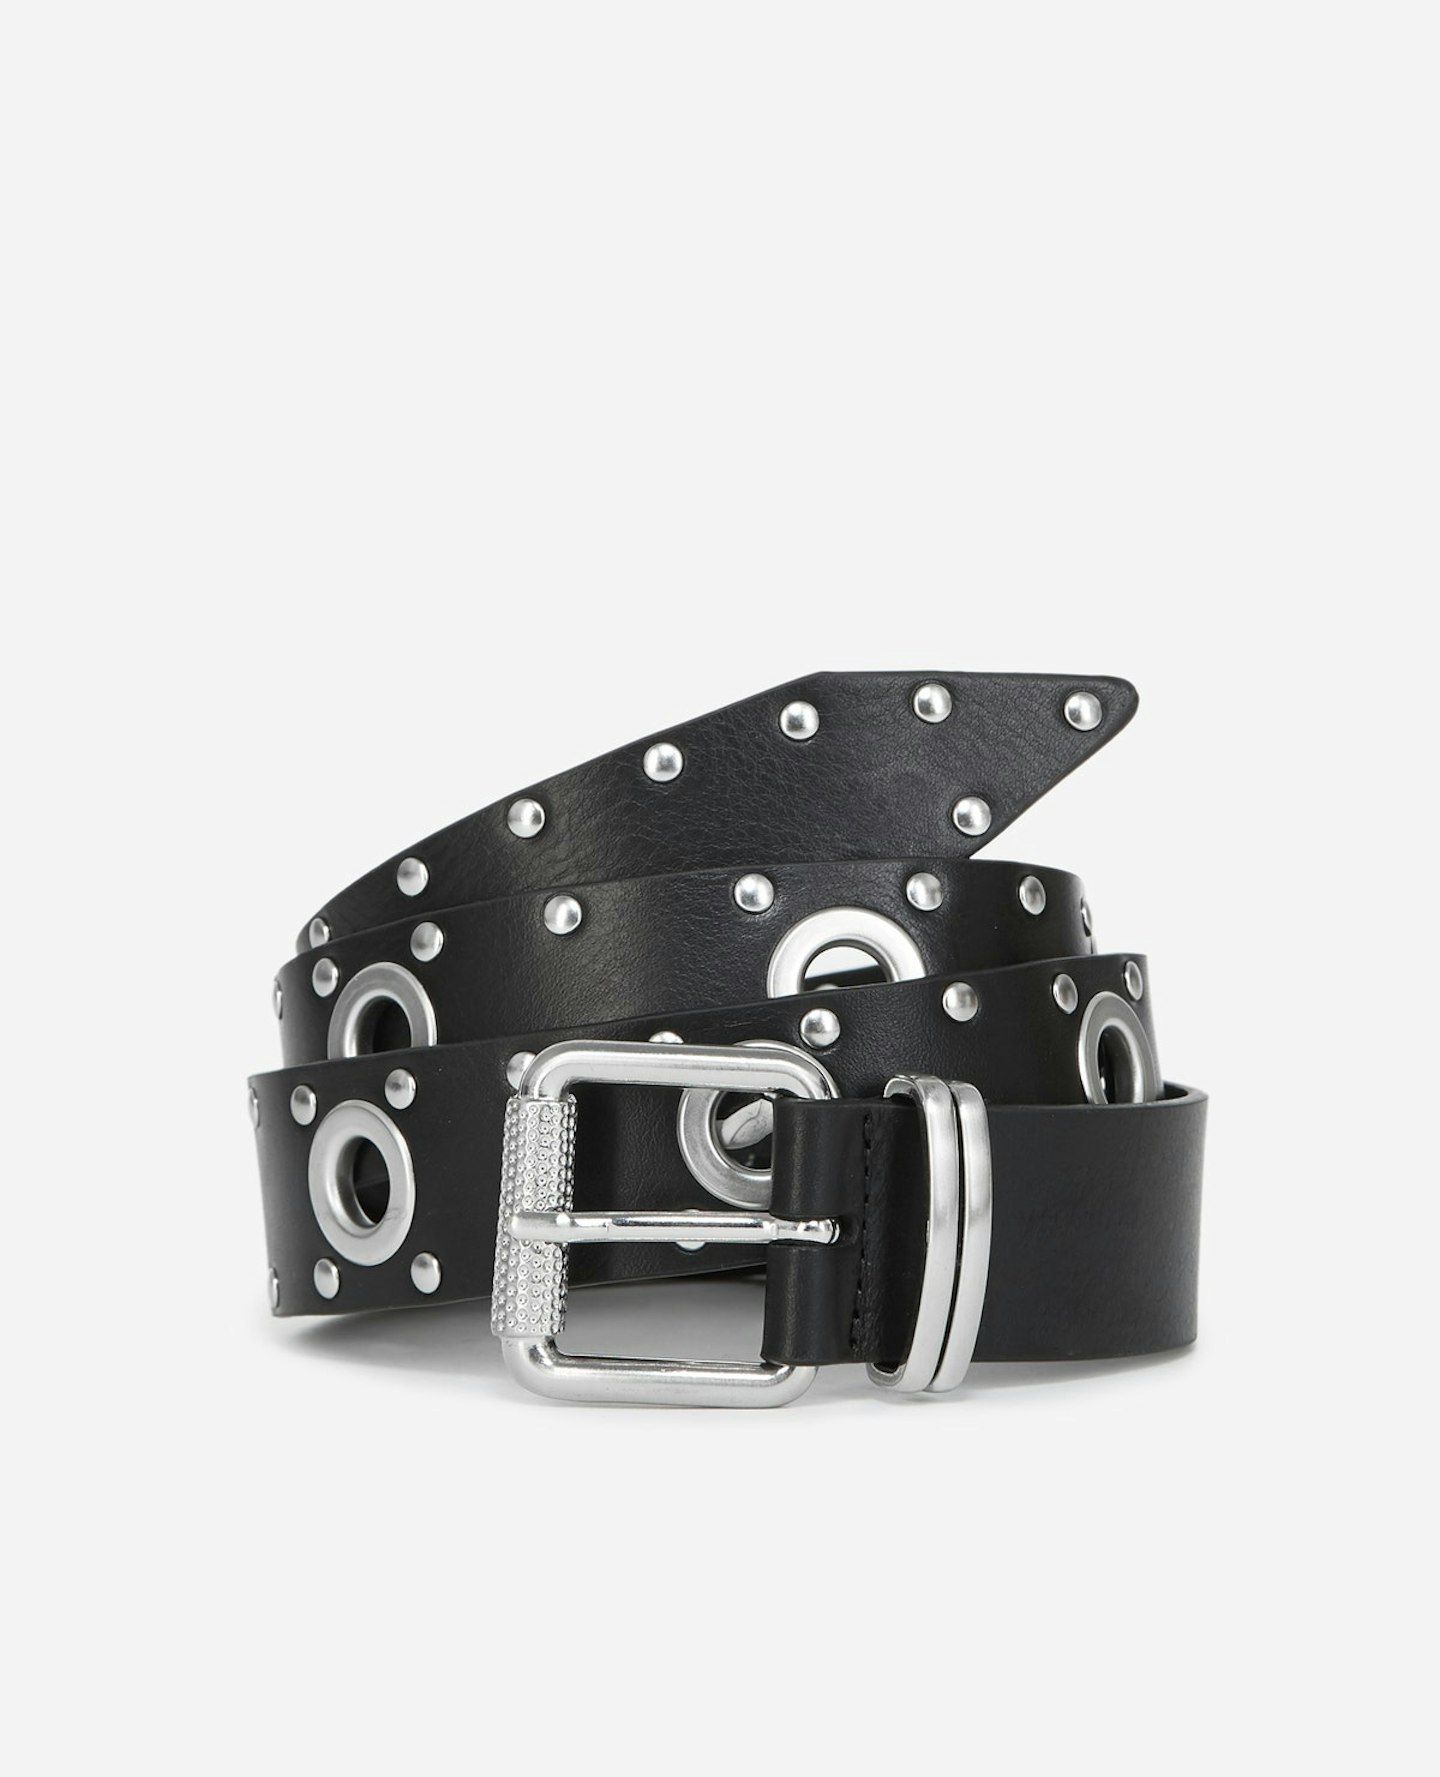 The Kooples, Black Leather Belt With Studs And Eyelets, £85